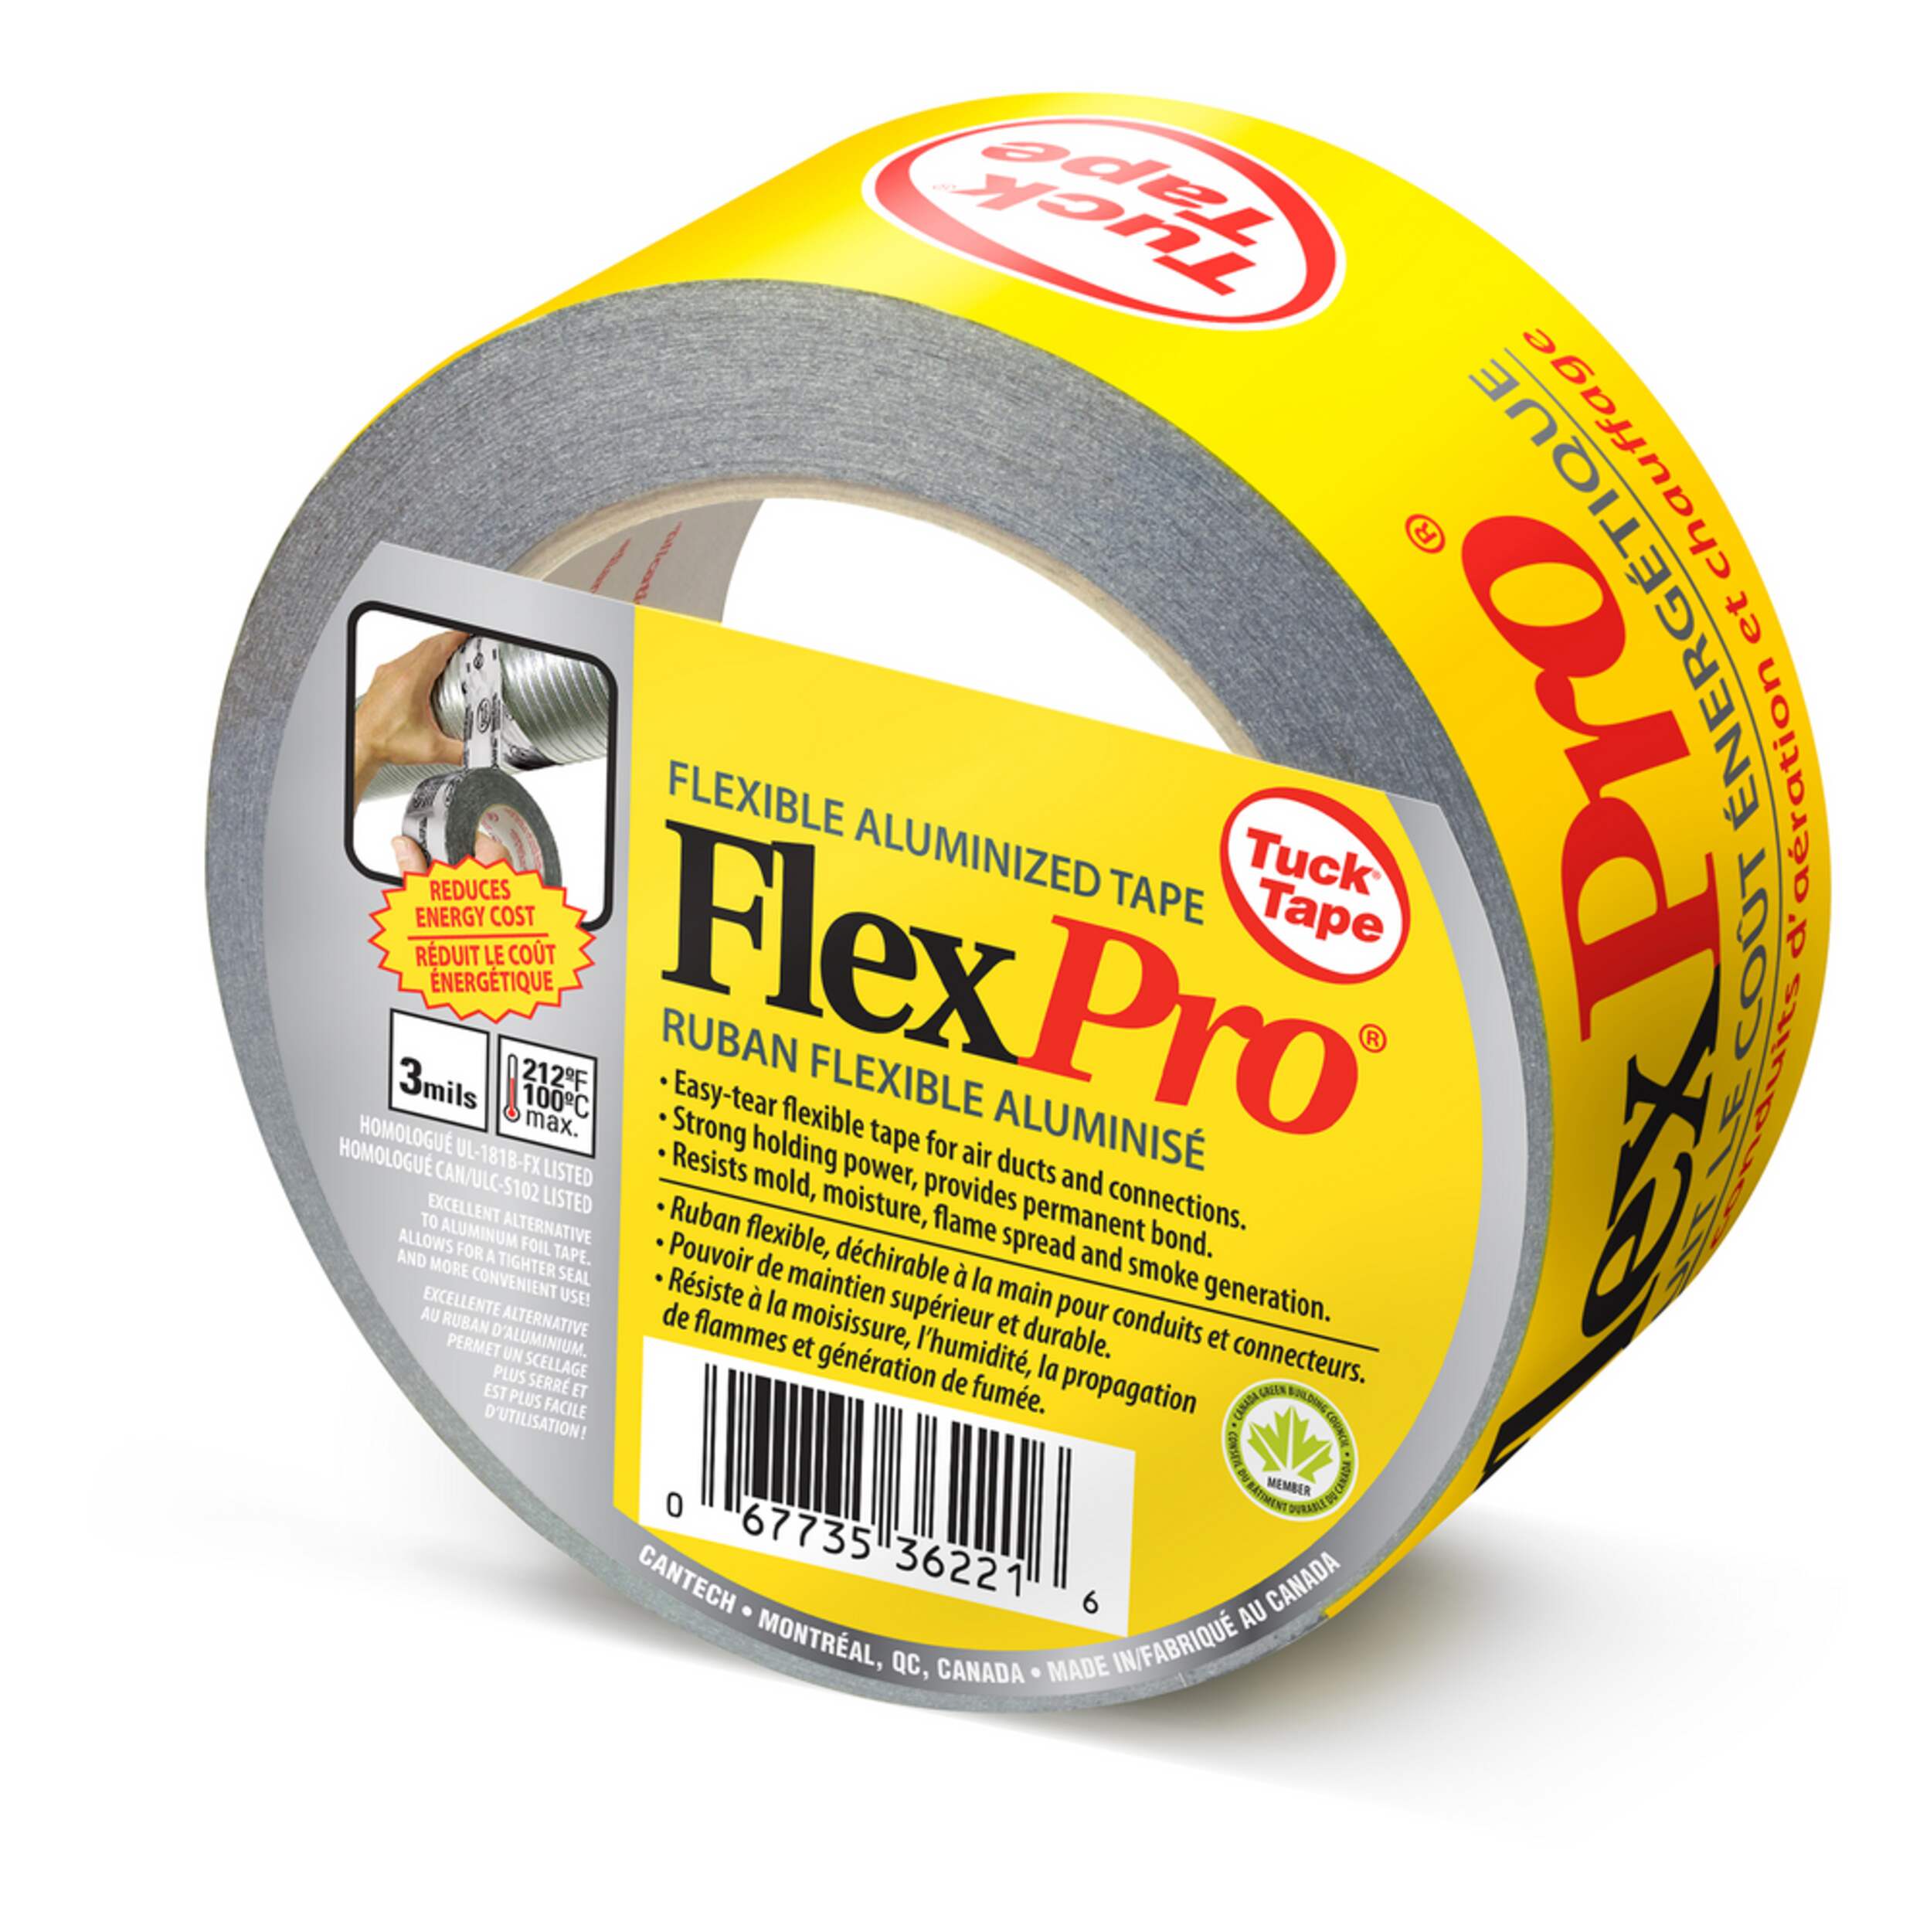 Tuck Tape FlexPro Flexible Aluminized Tape, Seals Air Ducts ...